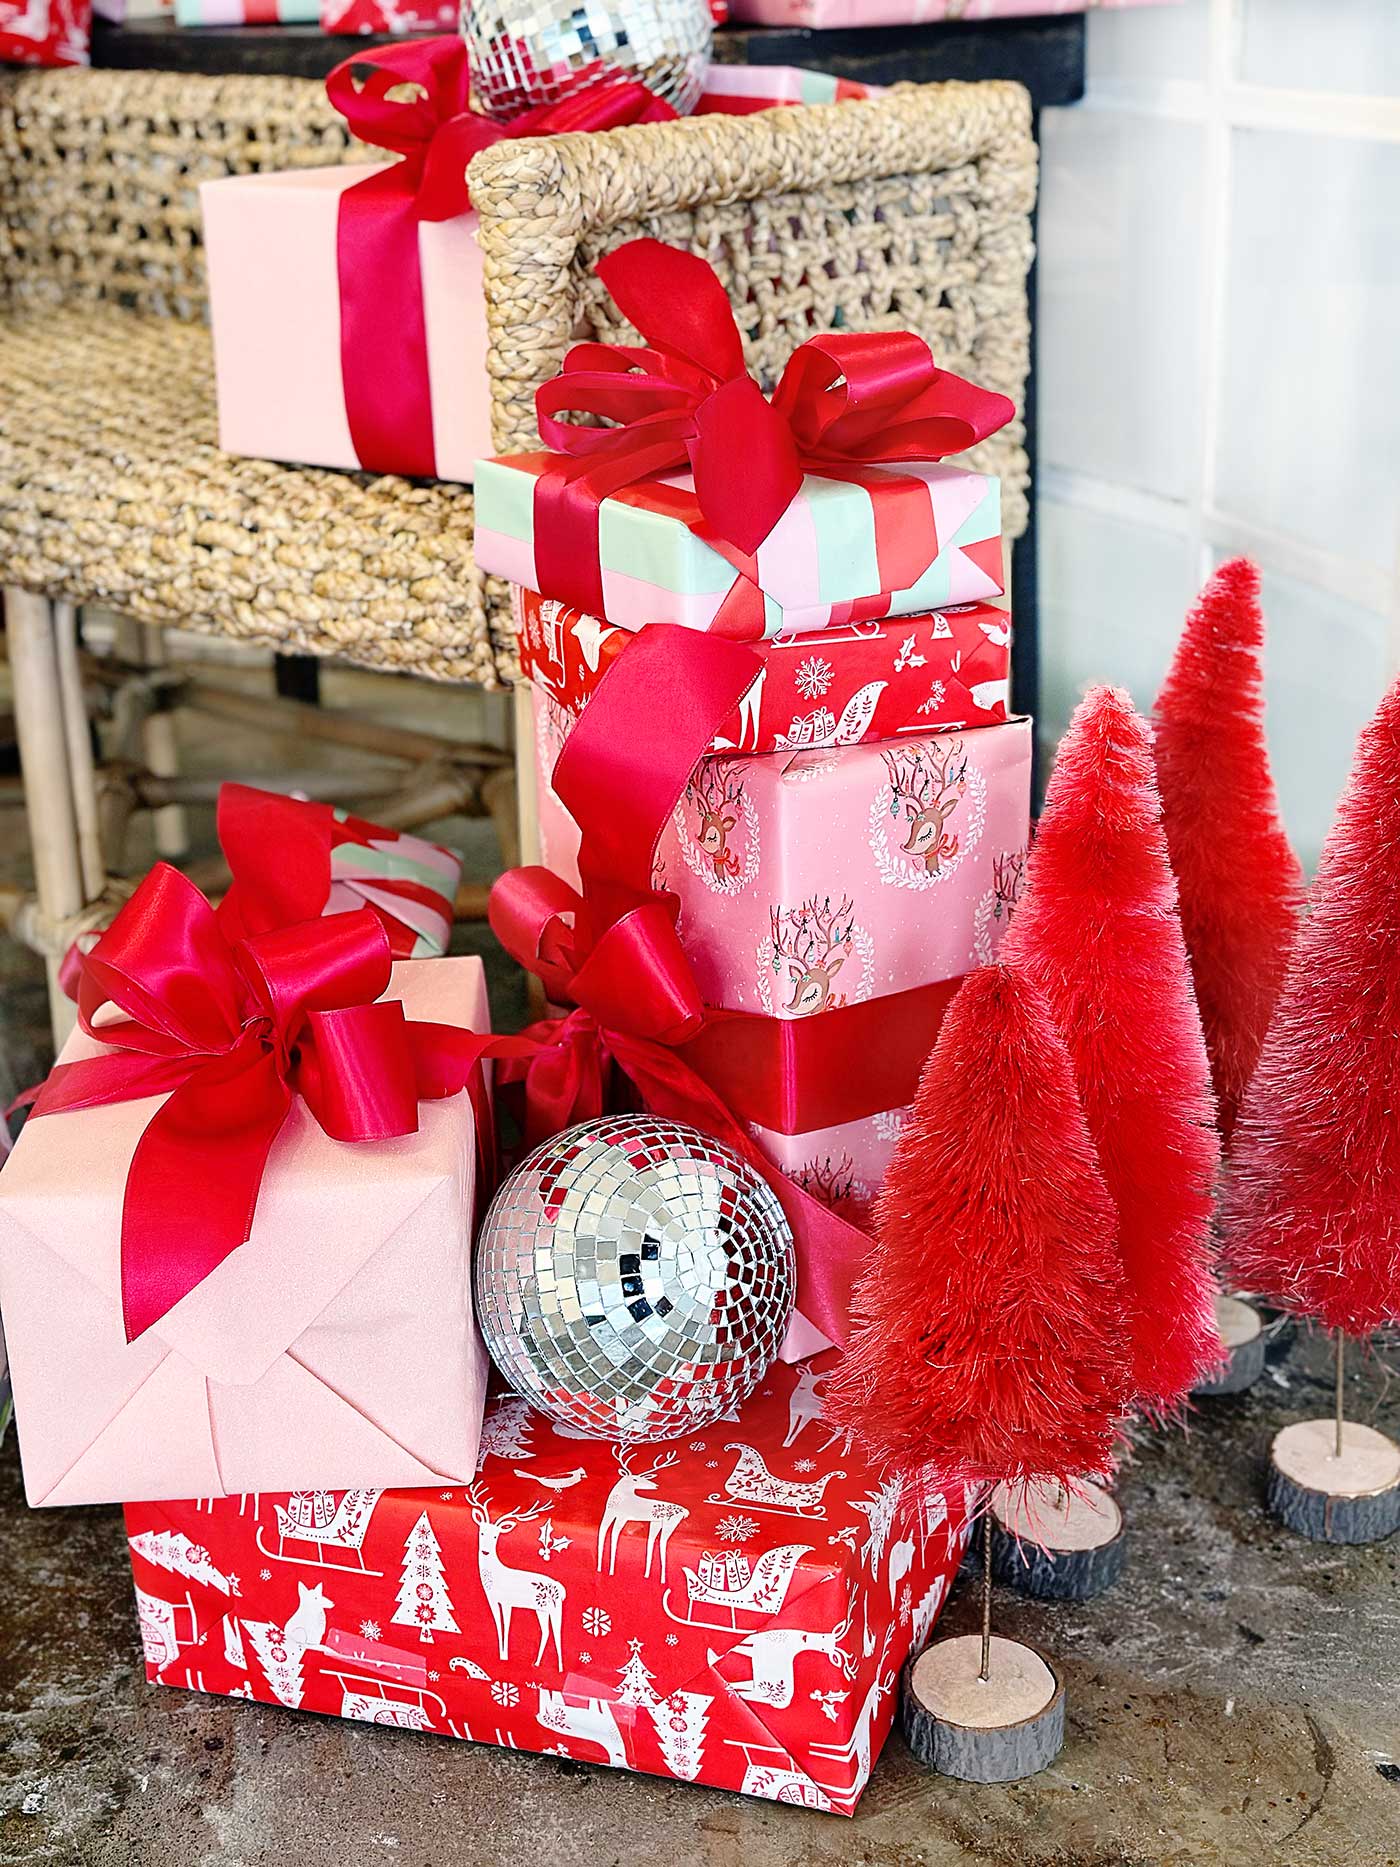 Holiday pink and red vignette